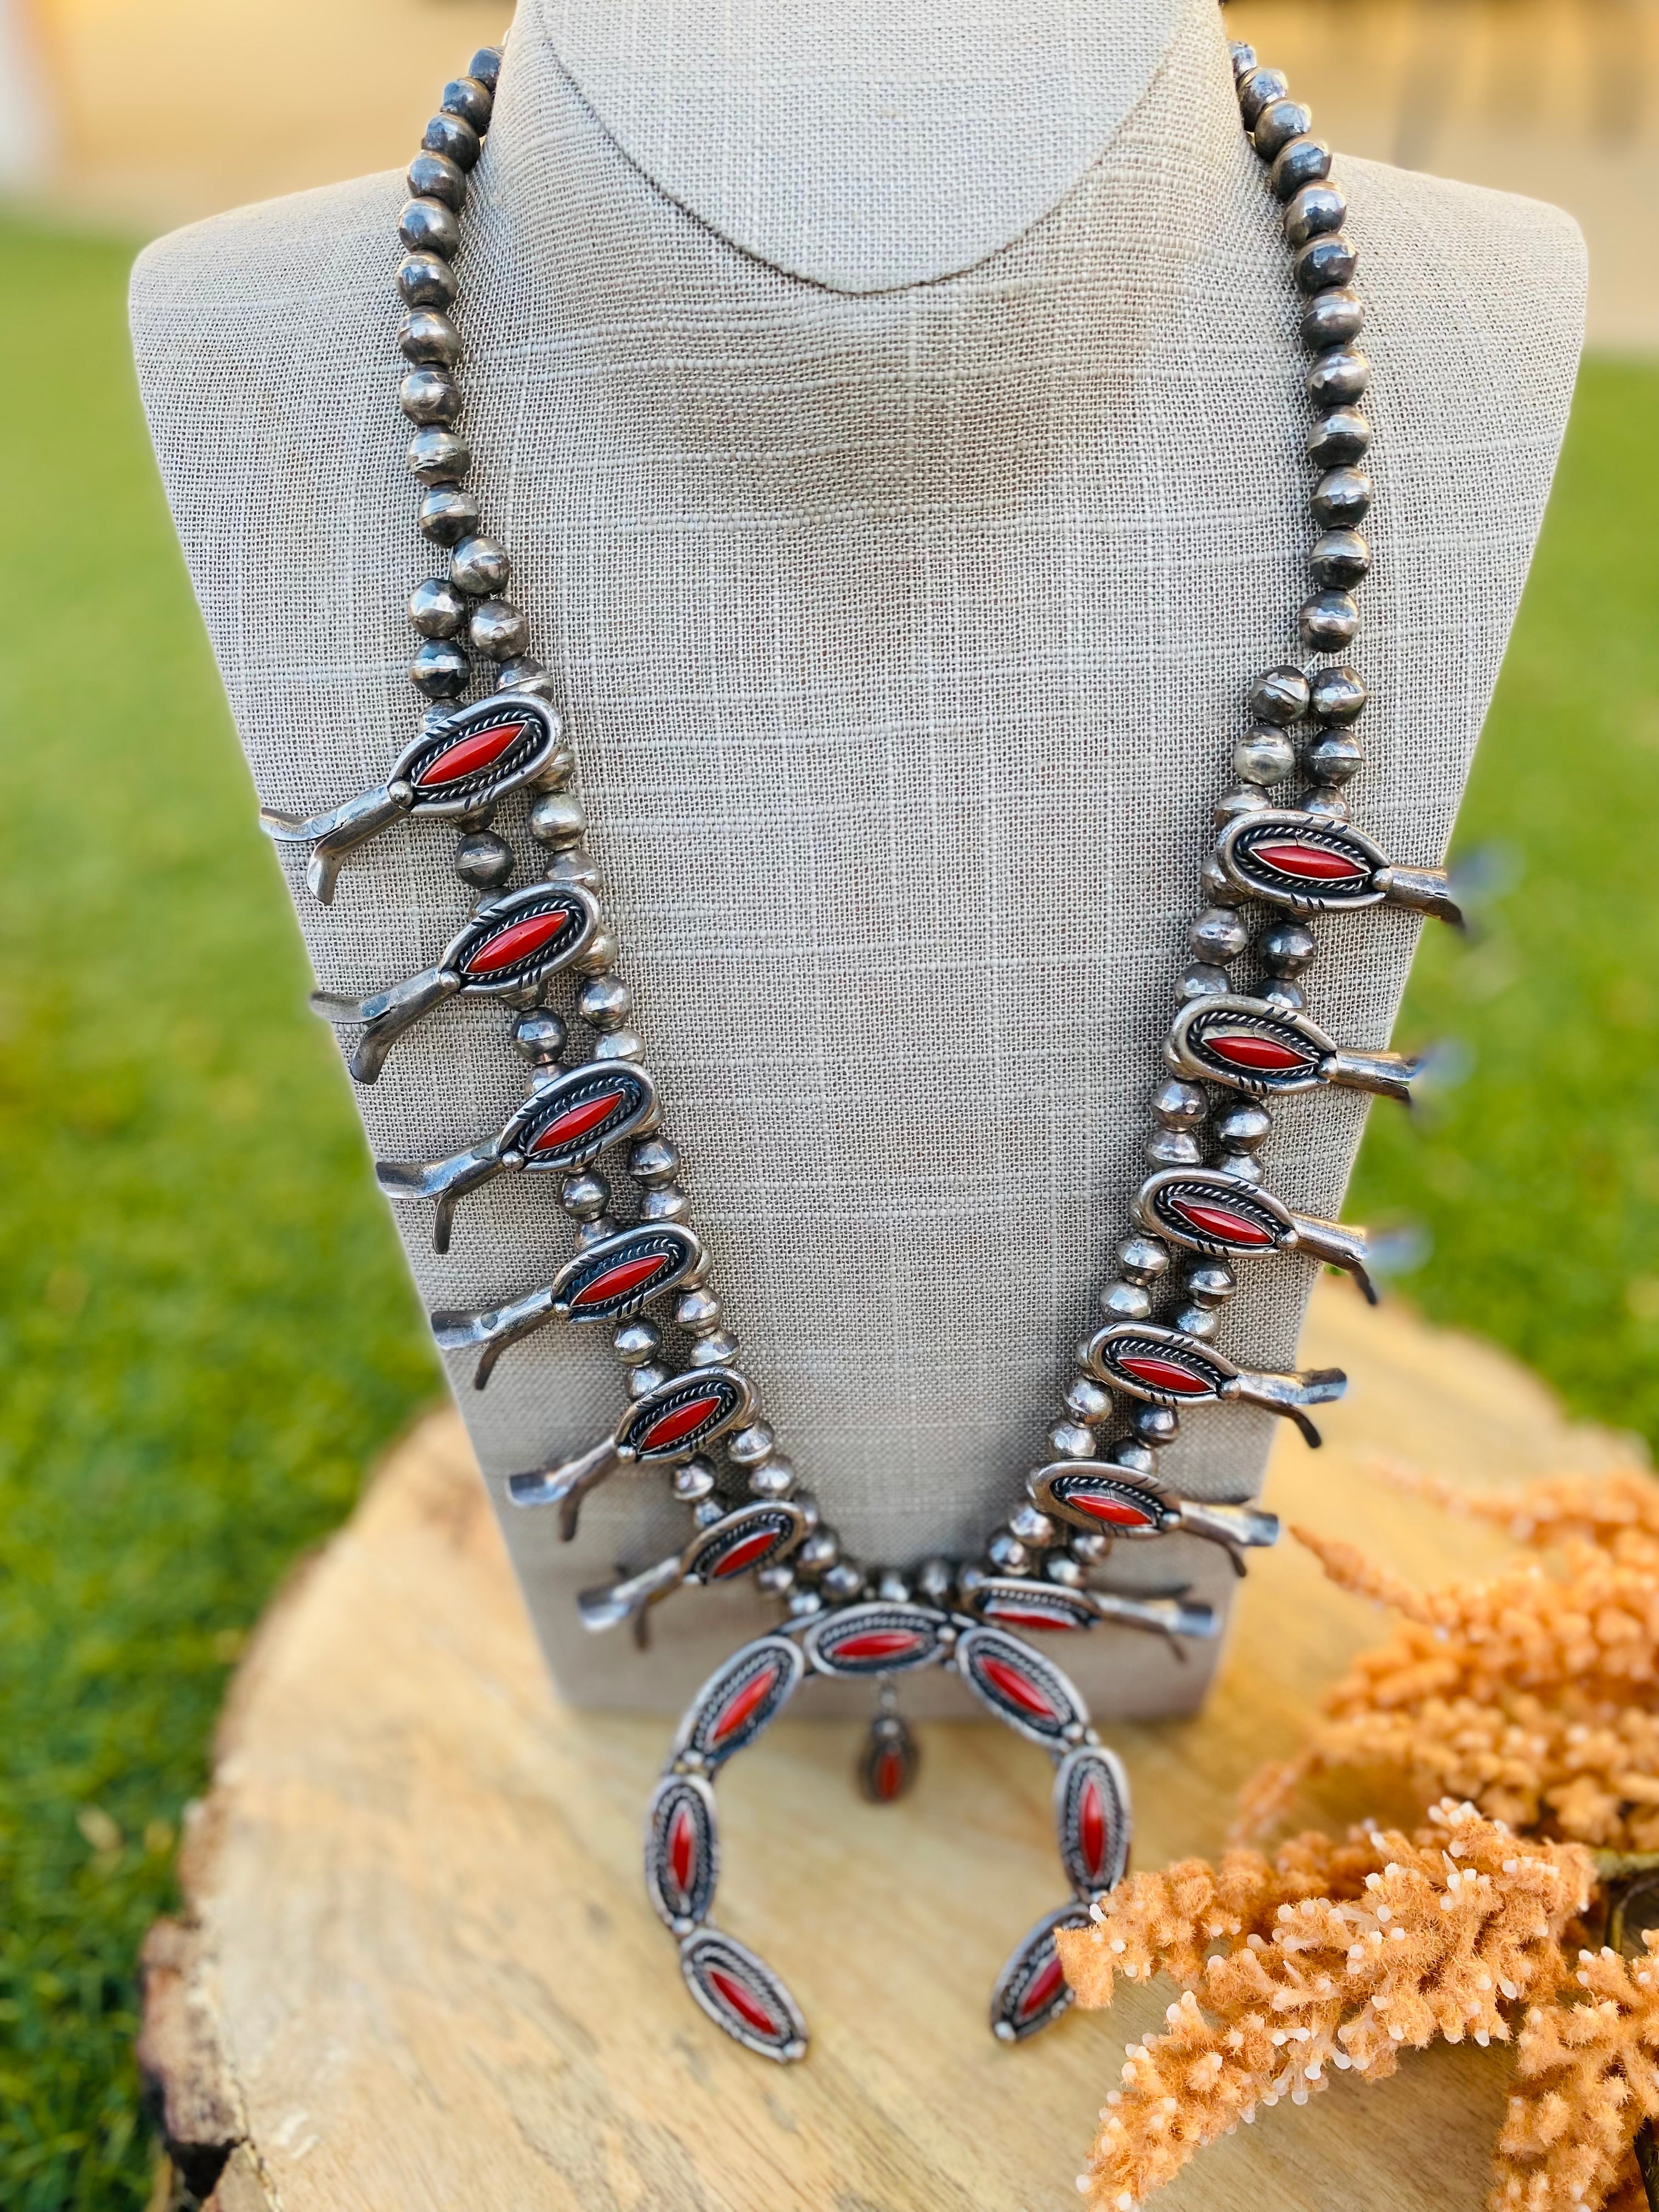 How to Style Our Southwestern Squash Blossom Necklace 3 Different